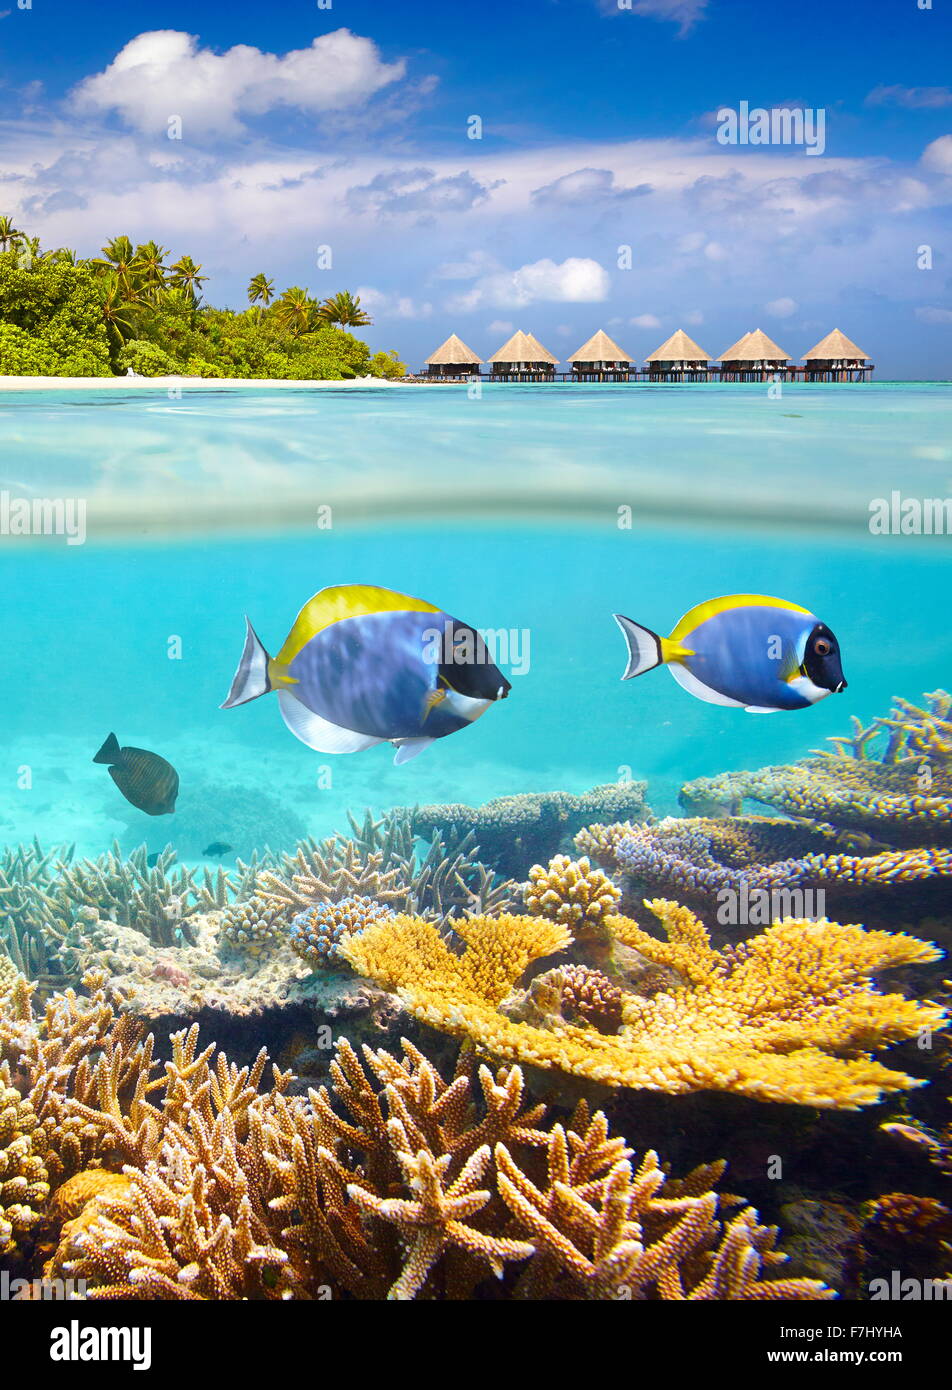 Maldives Islands - tropical underwater view with fish and reef Stock Photo